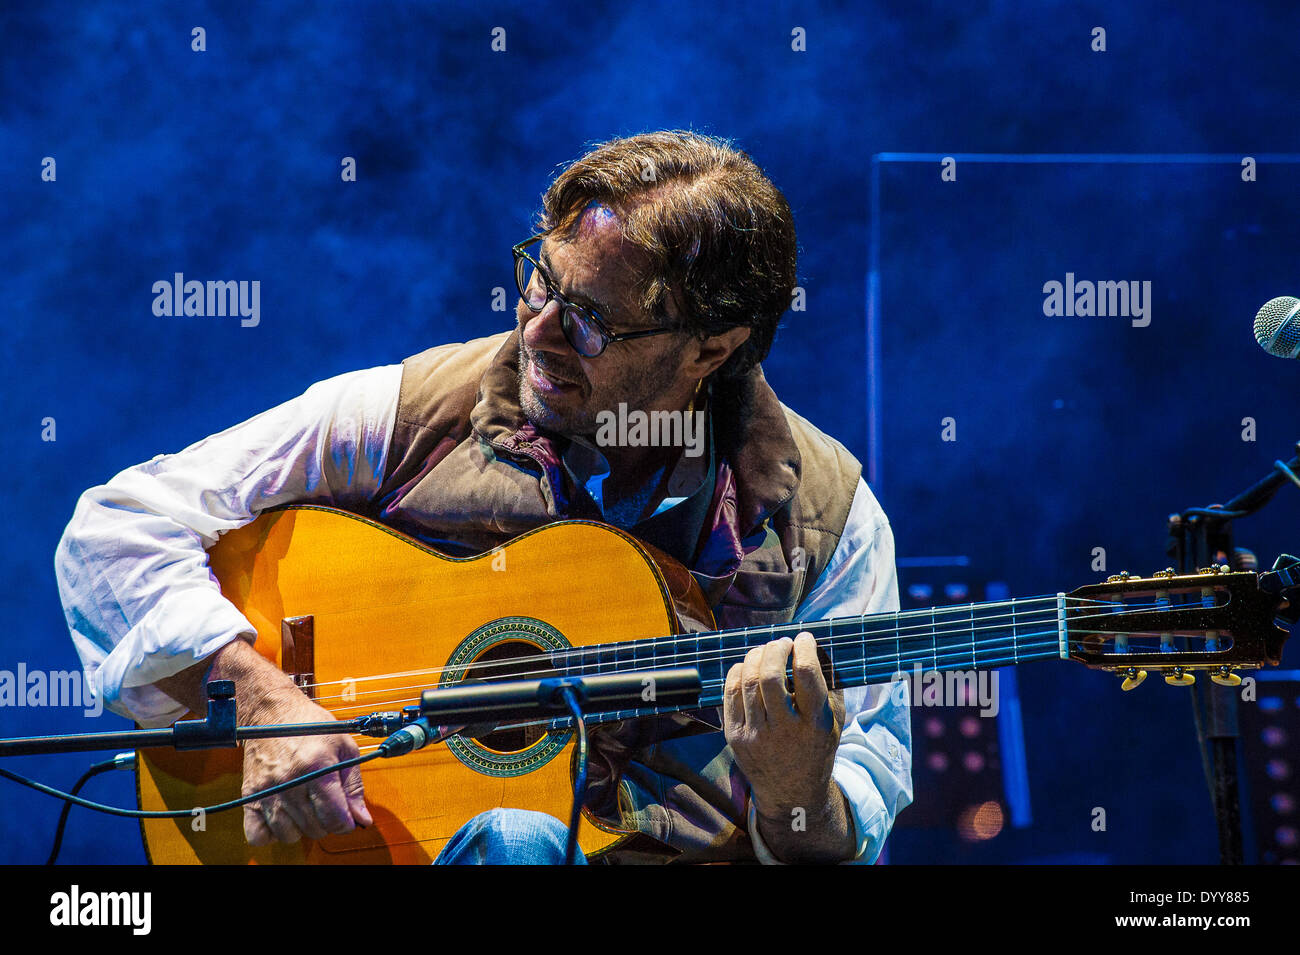 Turin, Italie. Apr 27, 2014. Torino Jazz Festival 27 avril 2014 - Al Di Meola Playng Beatles et plus -Al Di Meola Crédit : Realy Easy Star/Alamy Live News Banque D'Images